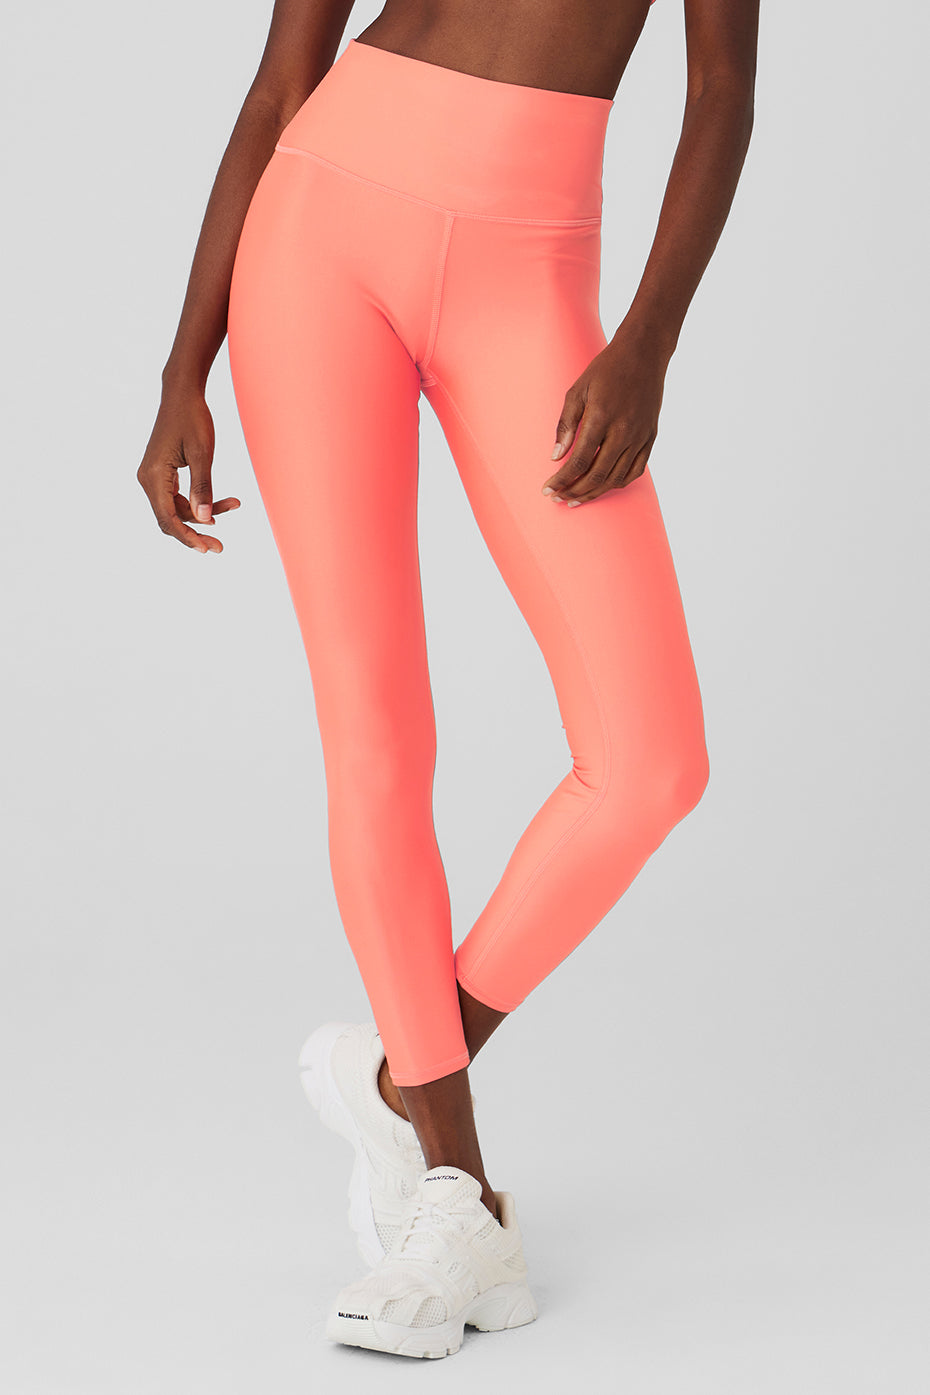 Alo Yoga Neon Pink Alo 7/8 HIGH-WAIST CHECKPOINT LEGGING Size XXS - $25  (72% Off Retail) New With Tags - From Erika